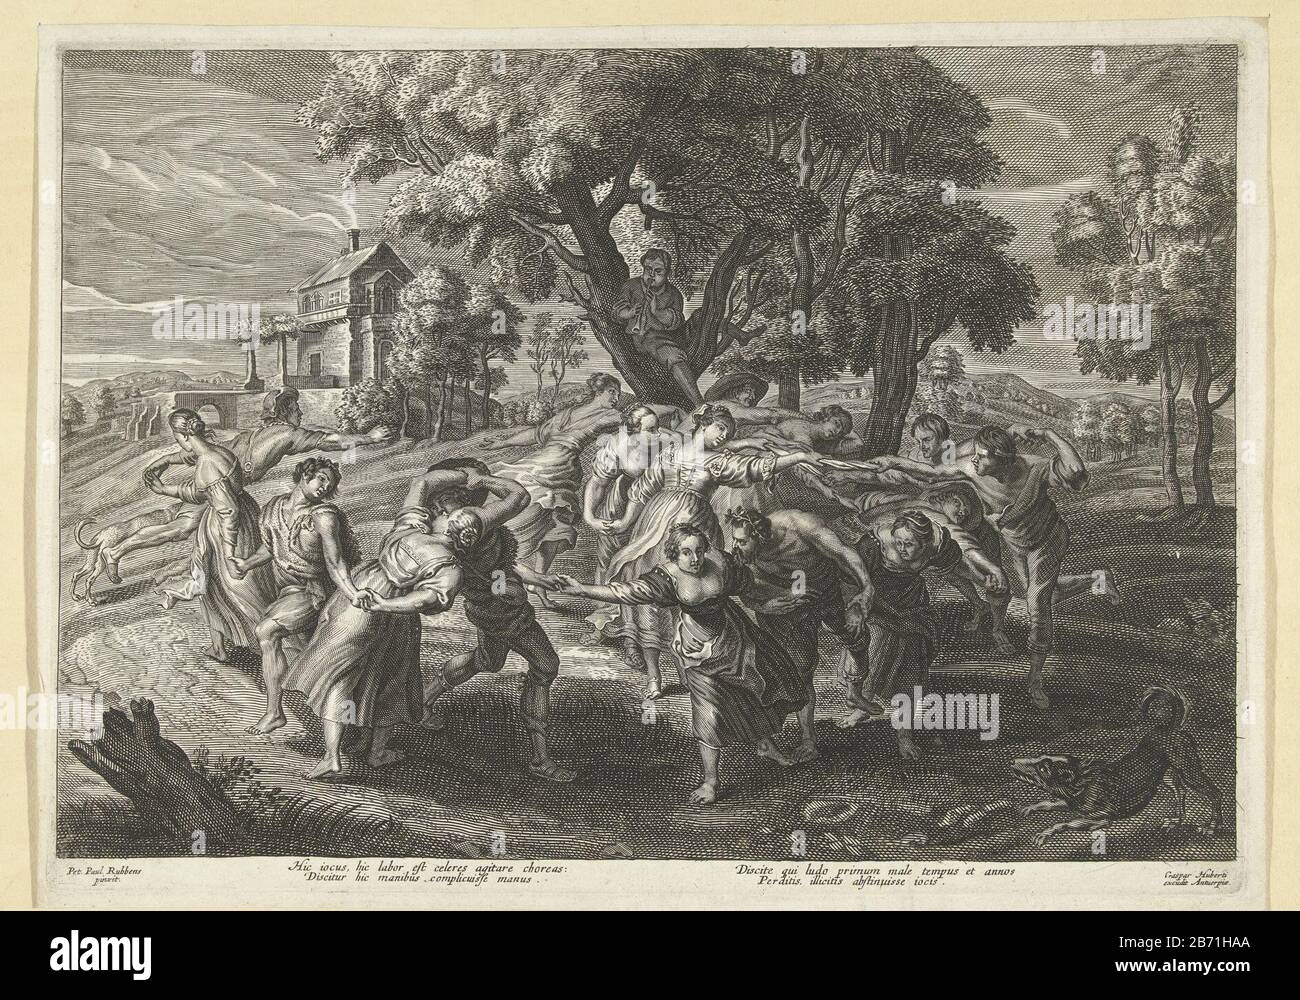 Landschap met mannen en vrouwen die dansen Landscape with cheerful company  of men and women dancing to the music of a flute player who is in a tree.  The men try to